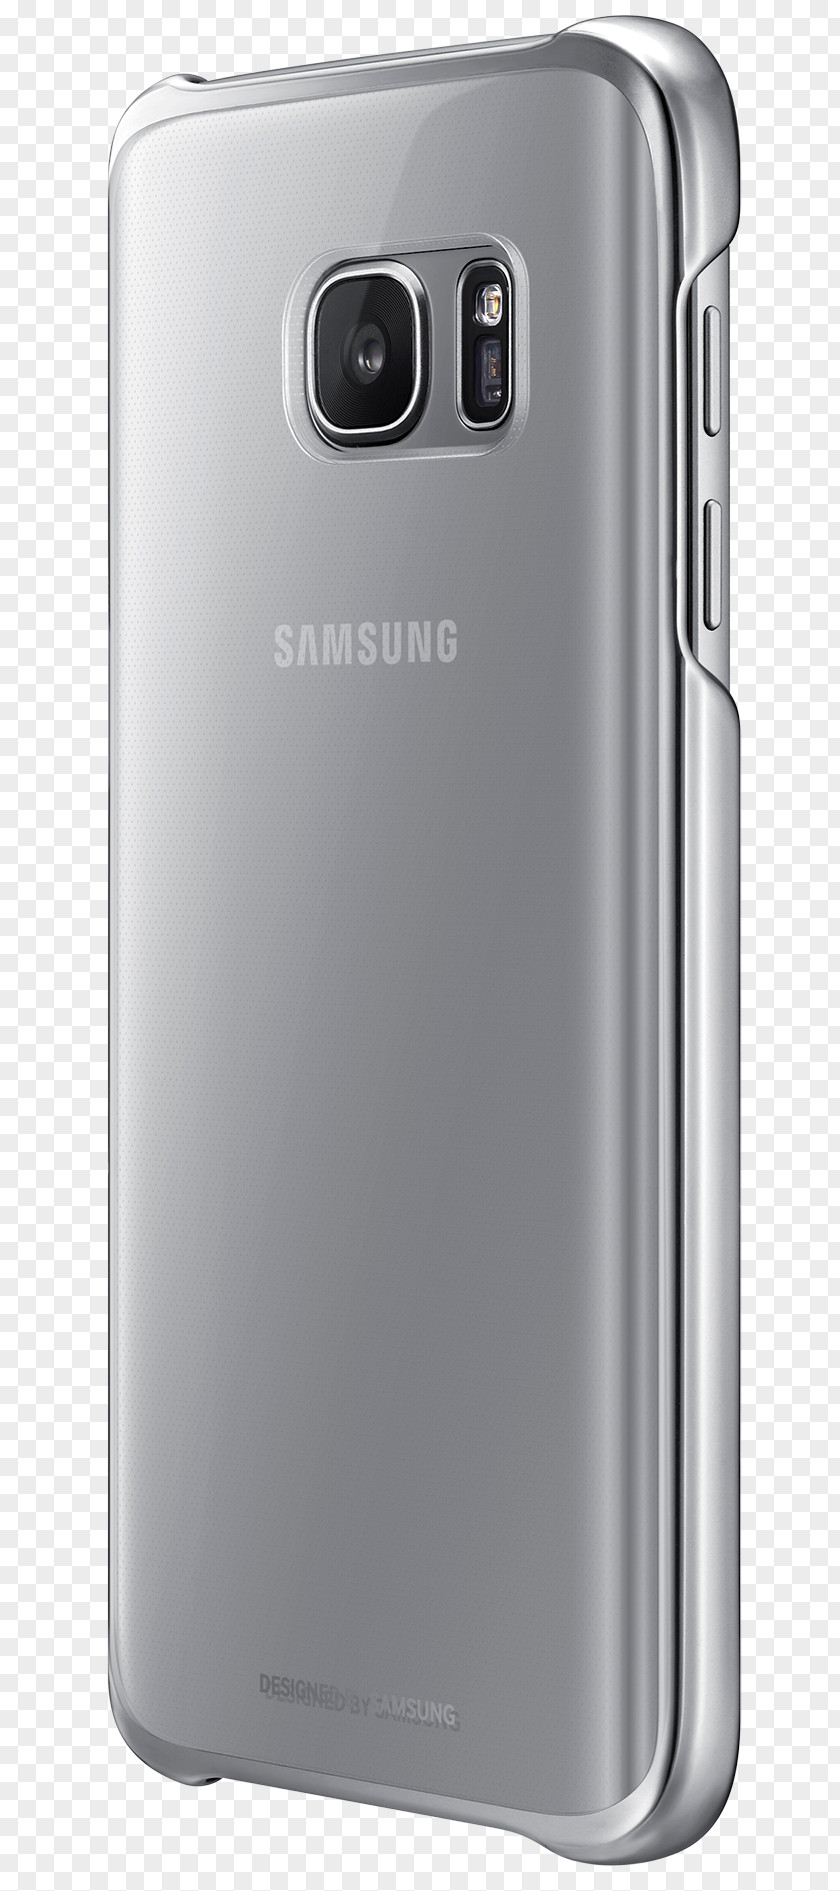 Samsung GALAXY S7 Edge Feature Phone Telephone PNG